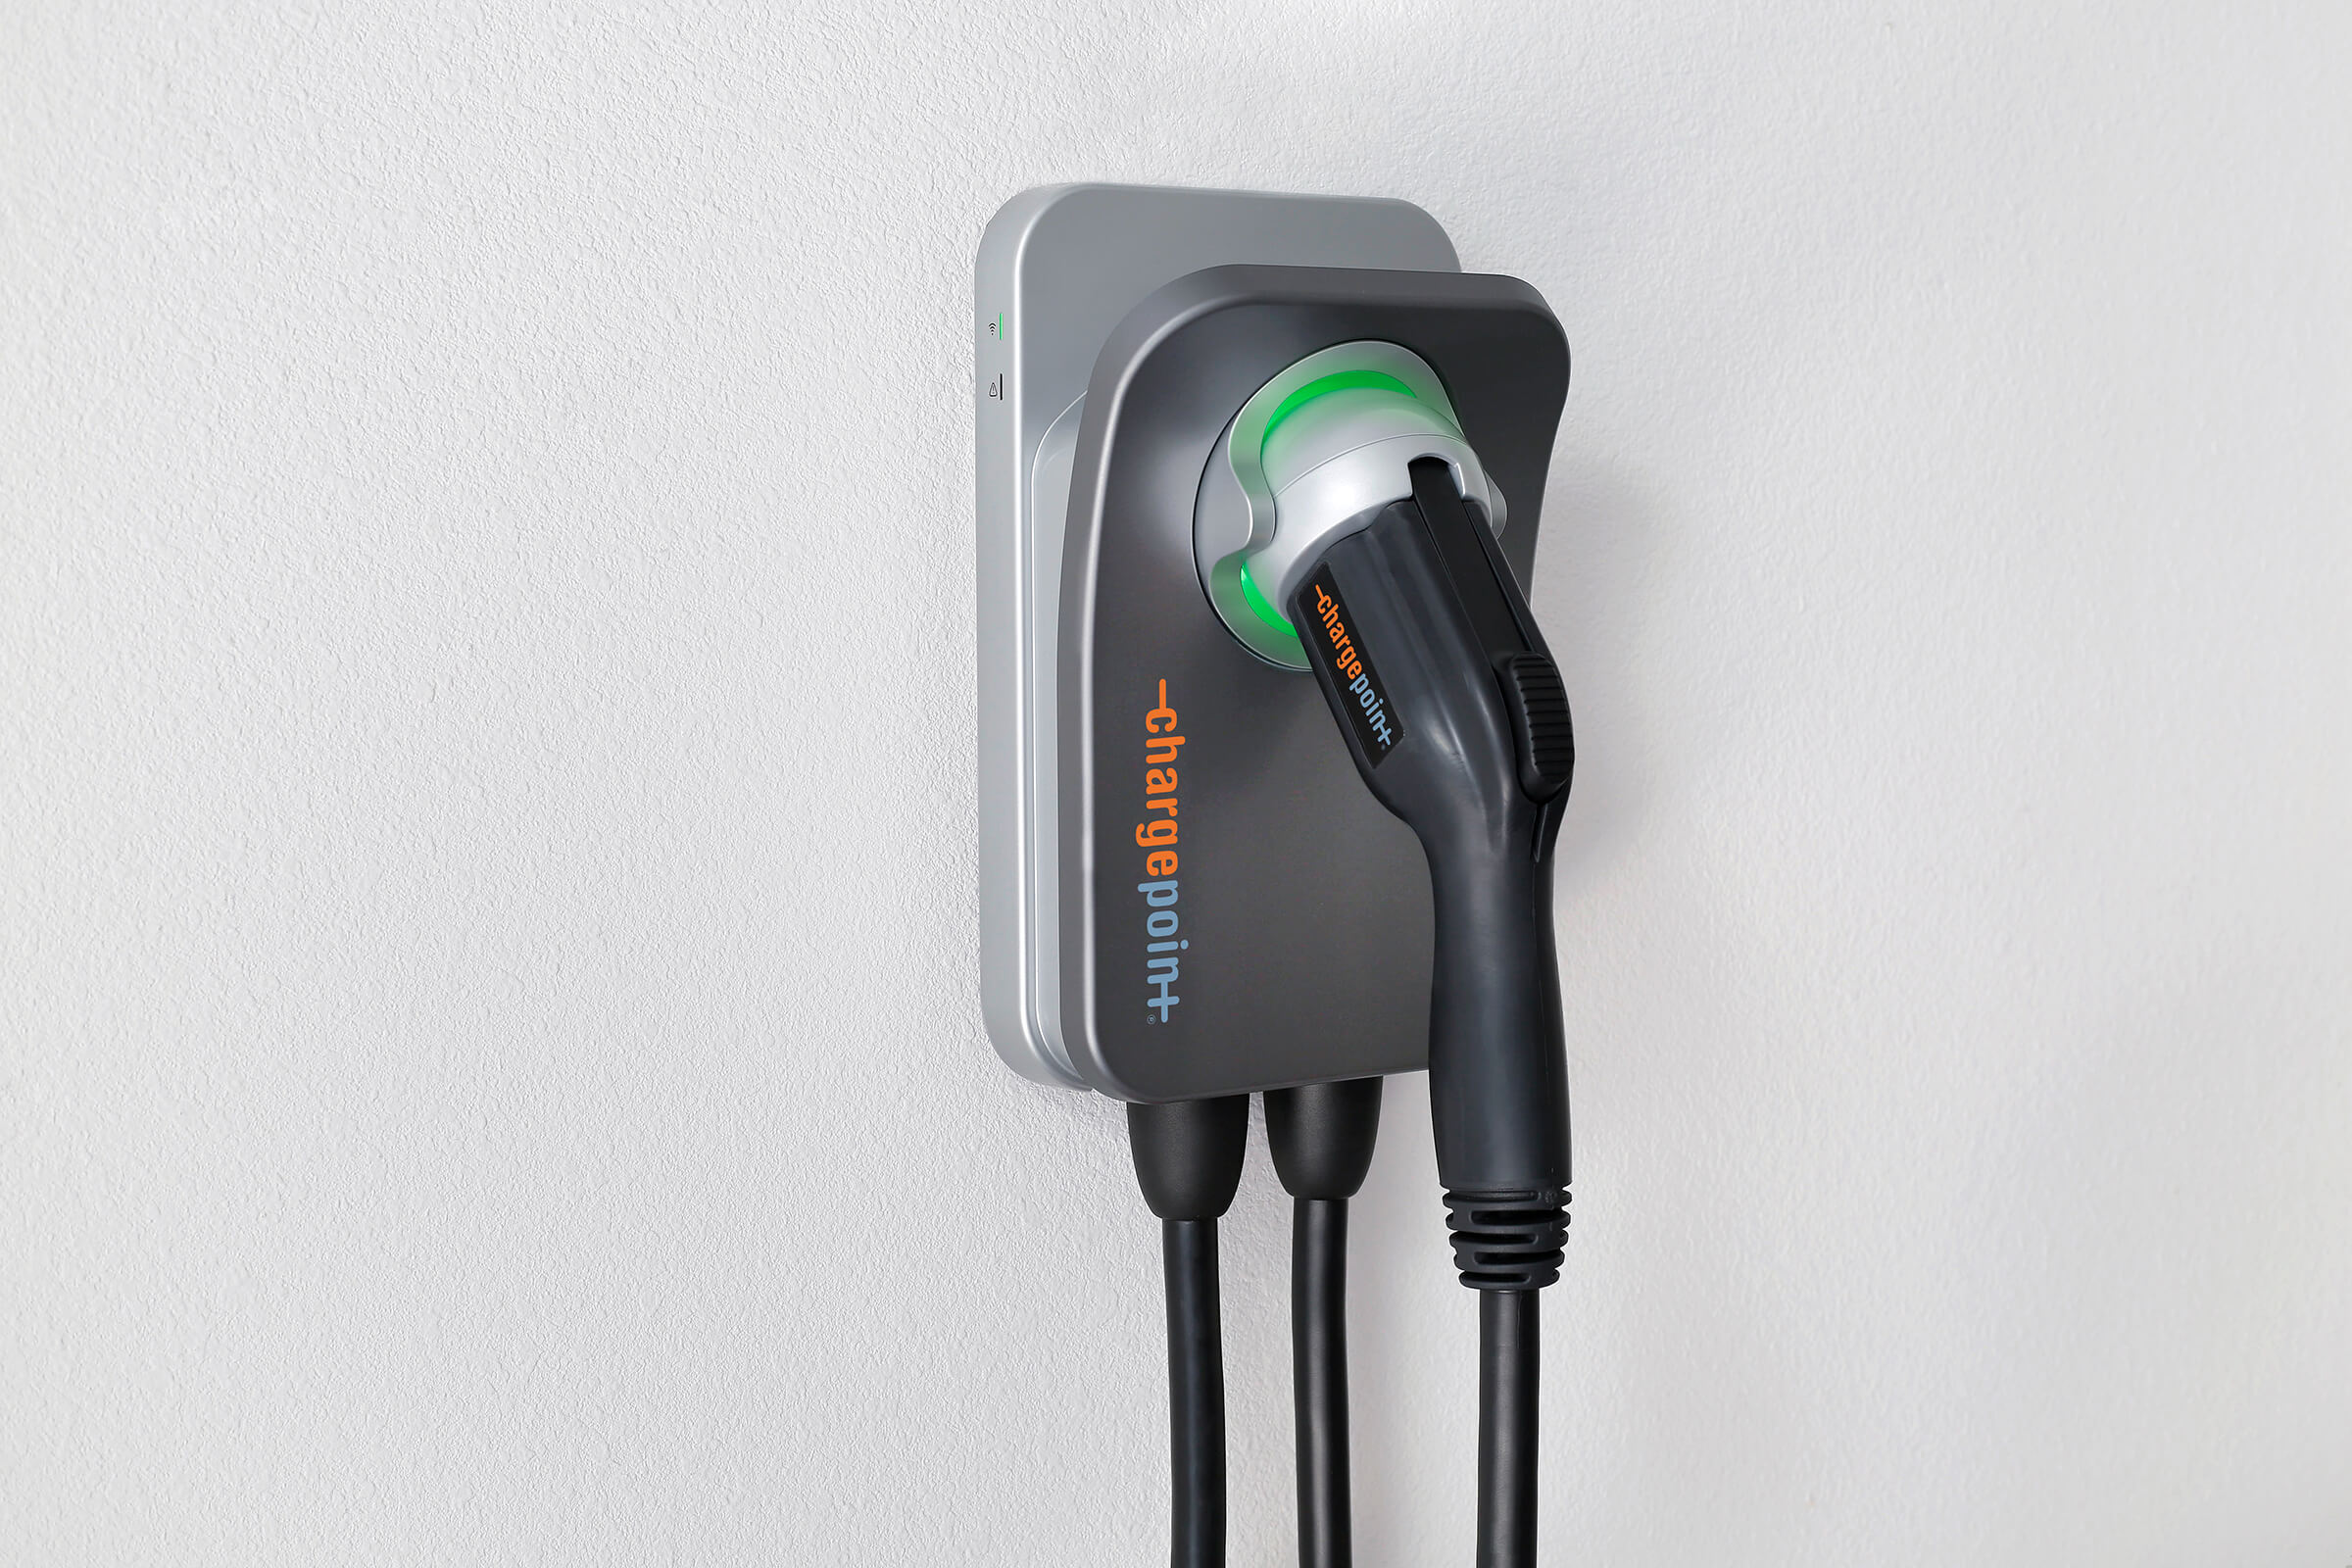 EV 25 Ft Cable ENERGY STAR Certified Charger 32A Electric Car Charger for All EVs Level 2 240V UL Listed ChargePoint Home WiFi Enabled Electric Vehicle Plug-in 